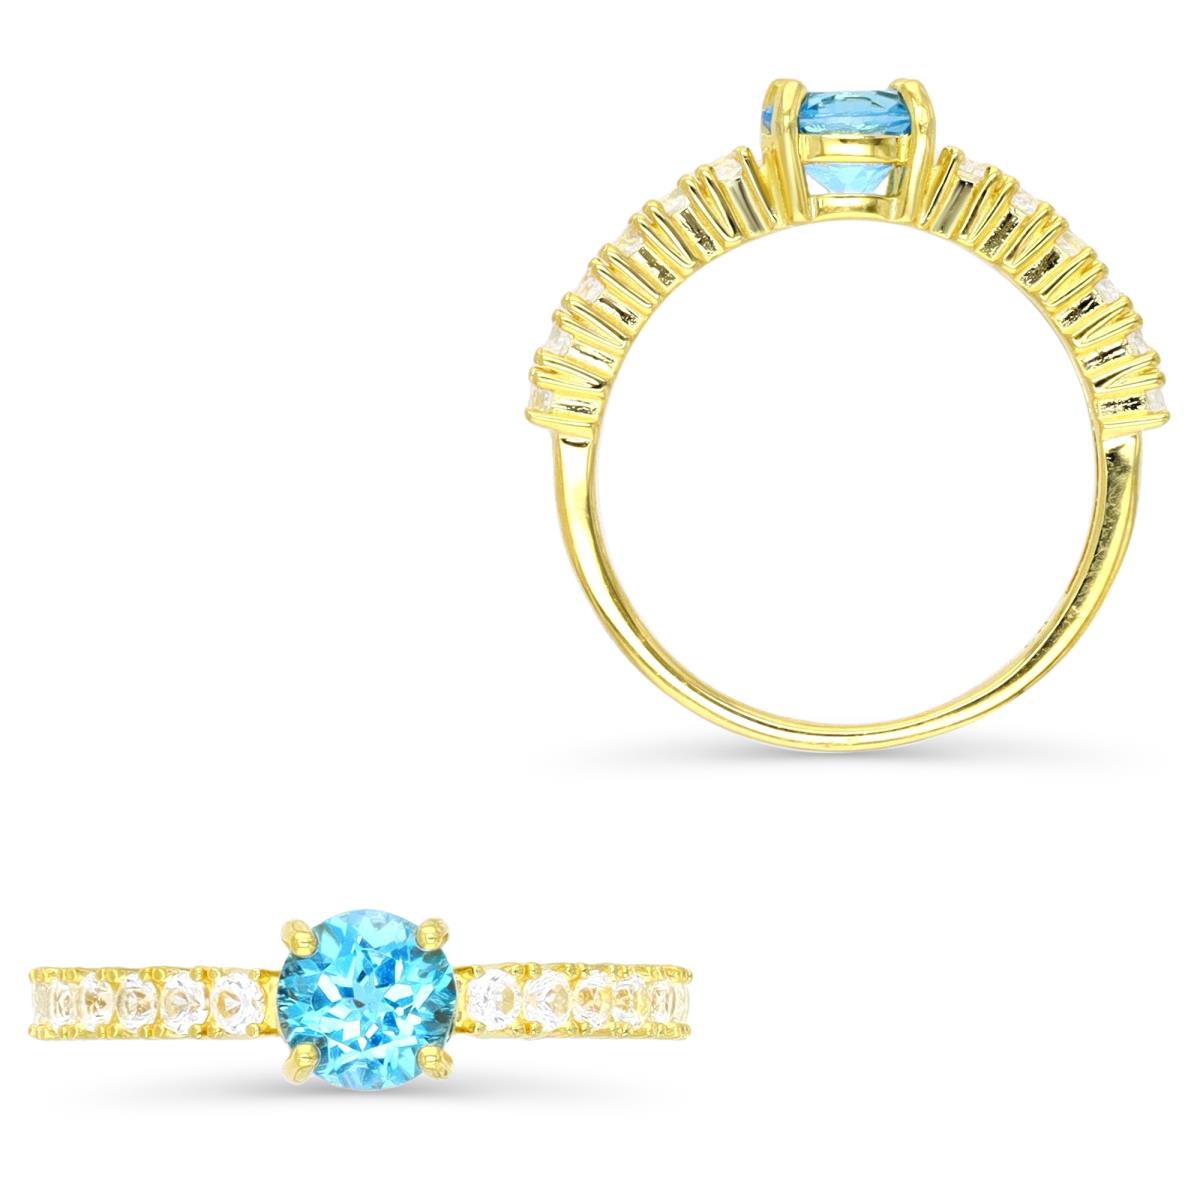 Sterling Silver Yellow Centered 6MM Rnd Sky Blue Topaz & Cr White Sapphire Pave Engagement Ring